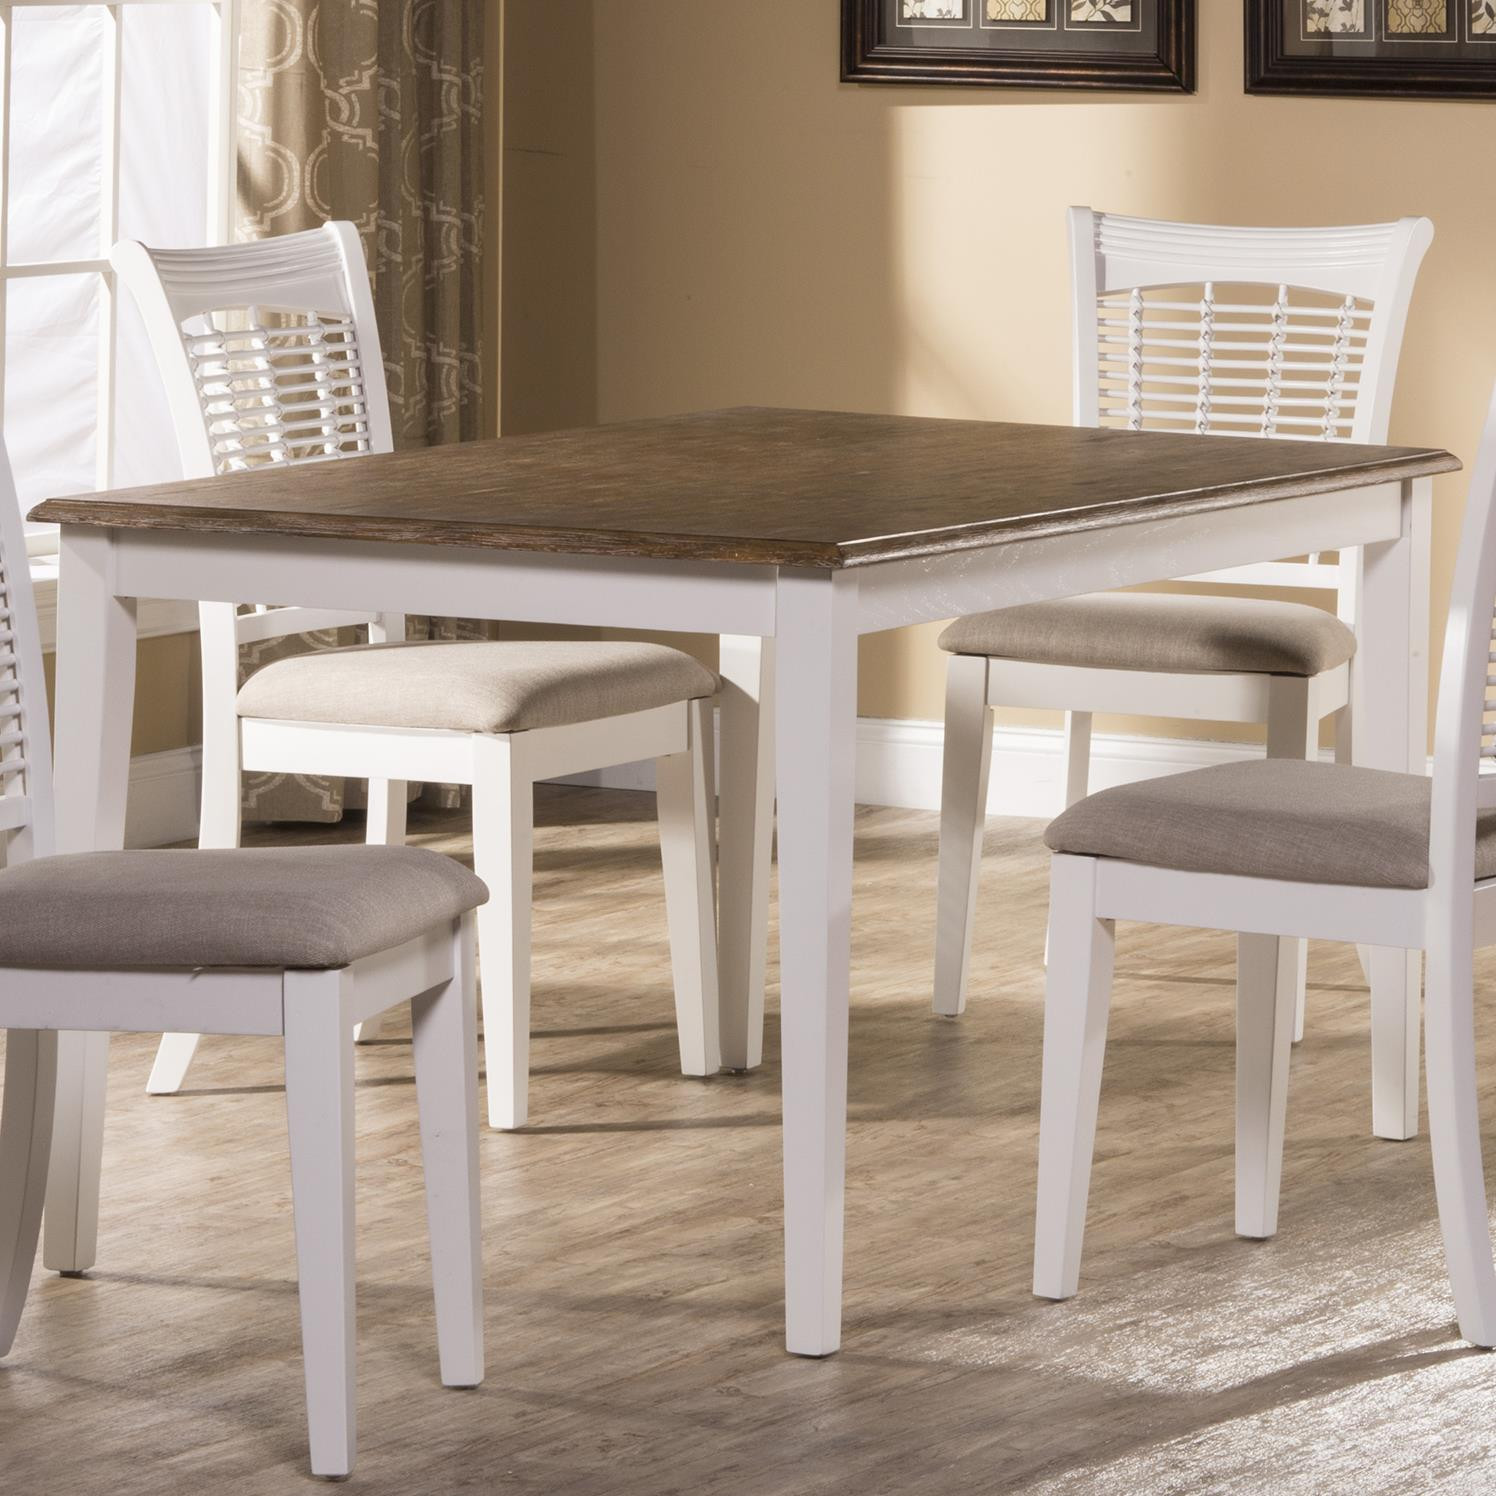 Kitchen Table White
 Hillsdale Bayberry White Casual Rectangular Dining Table